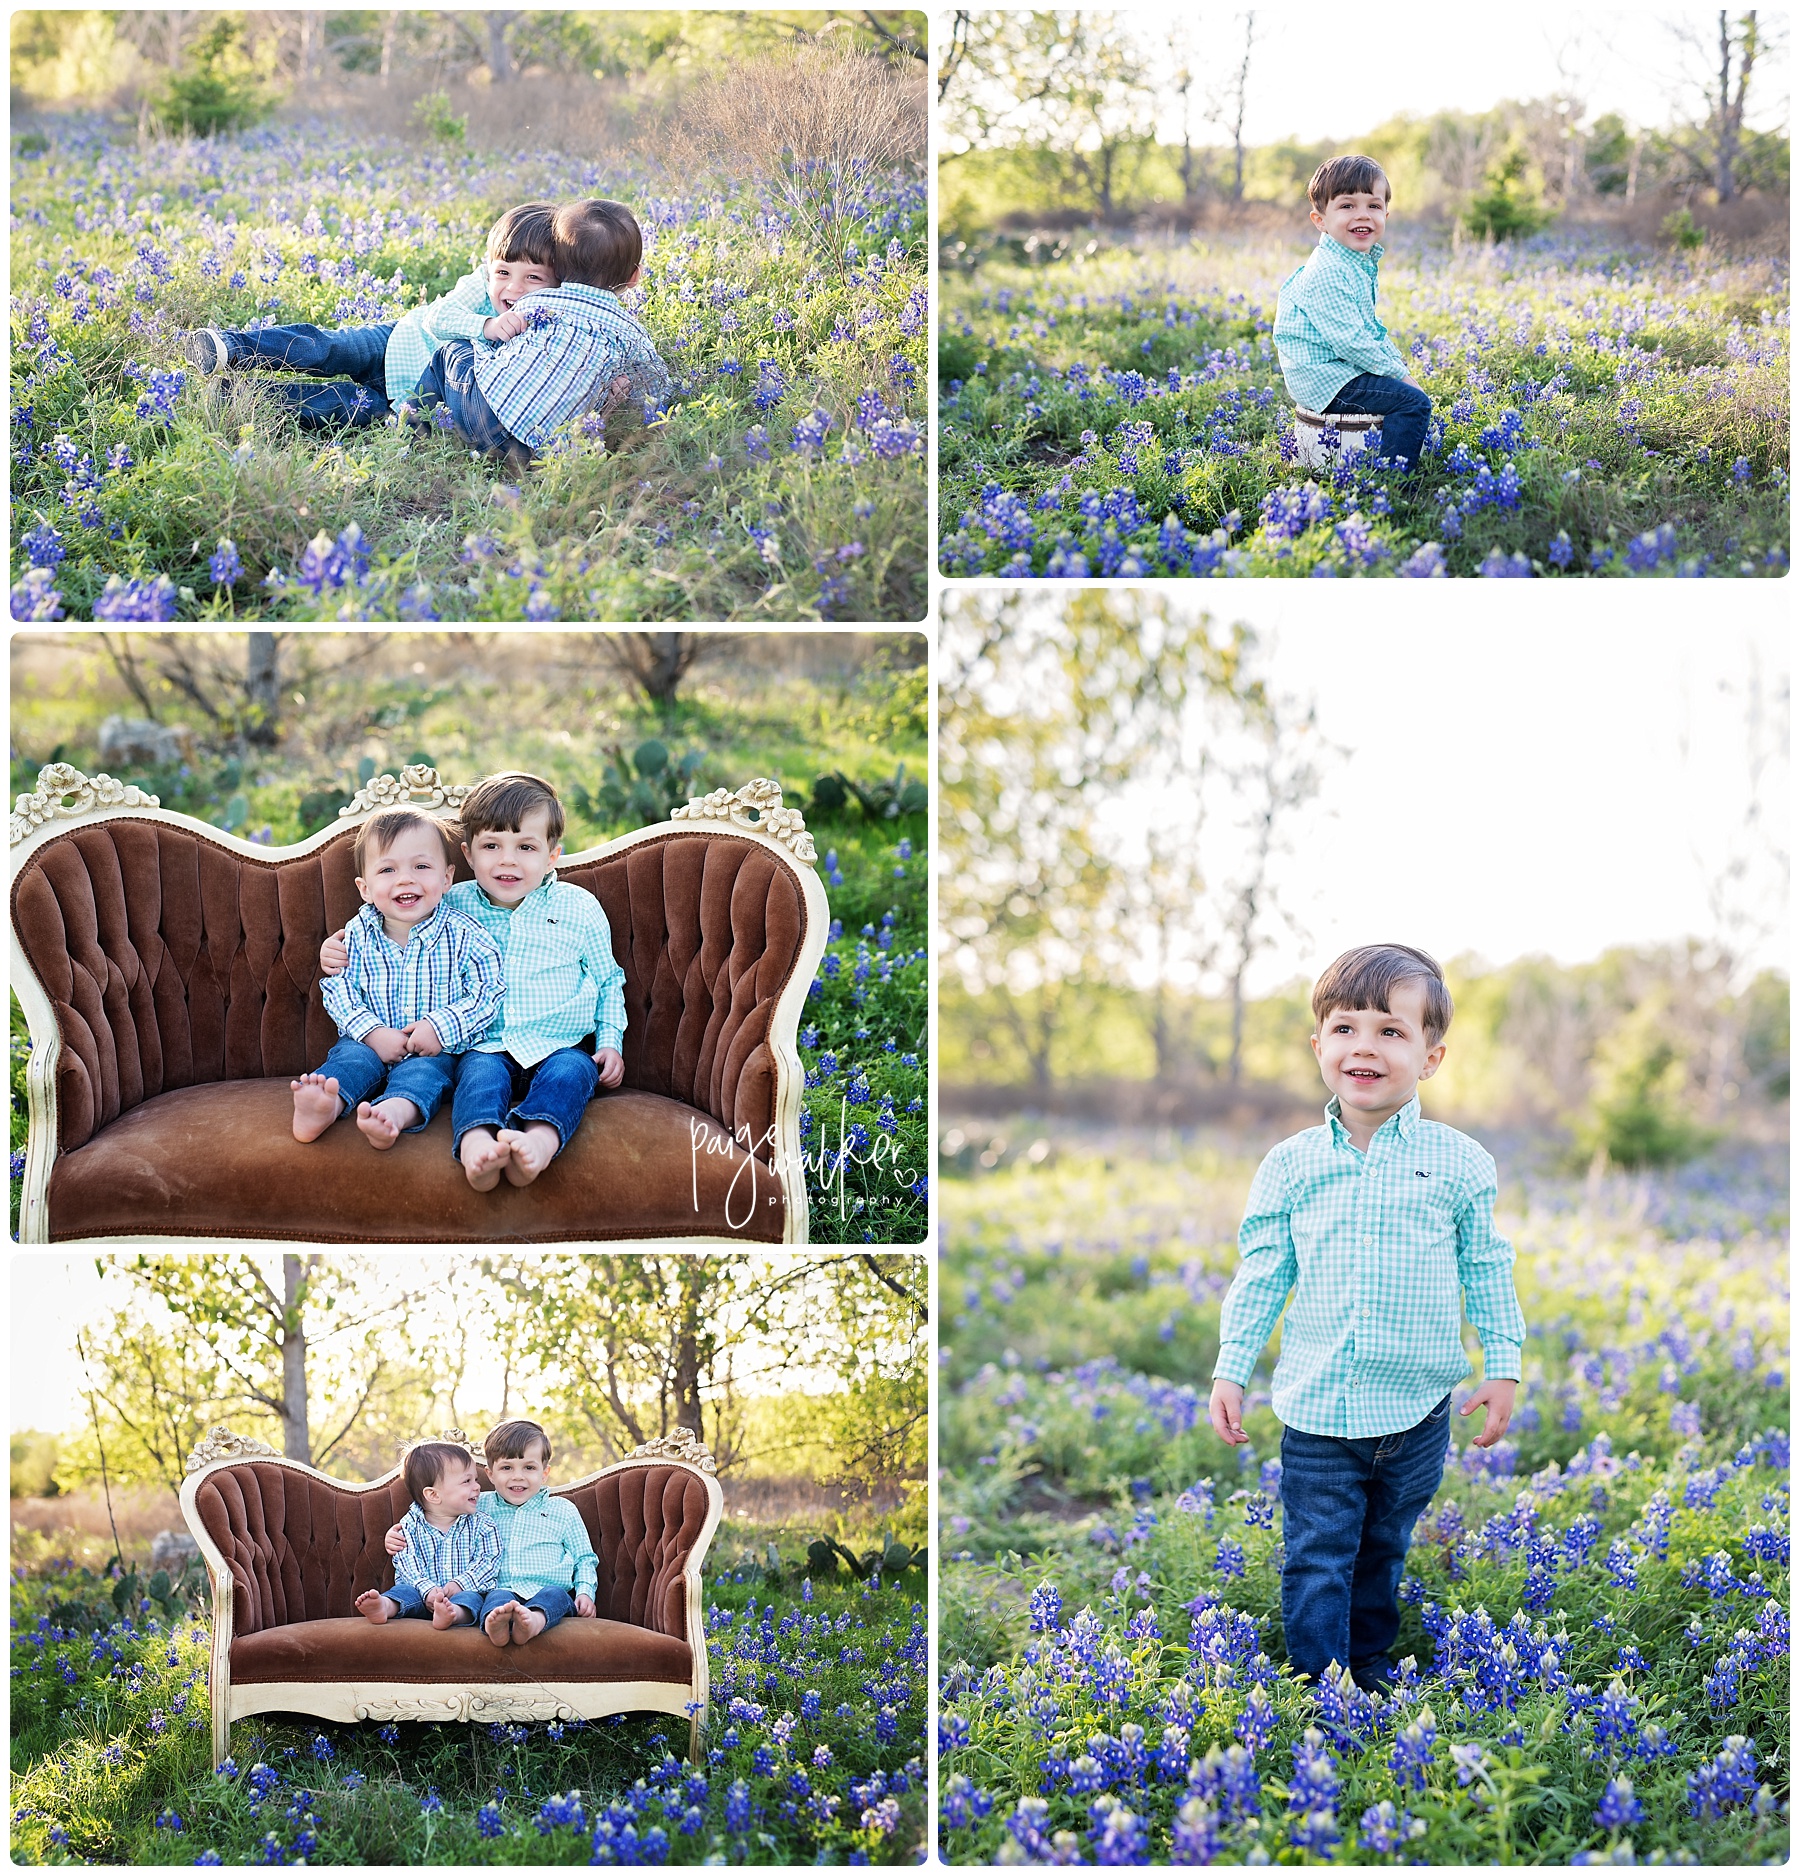 brothers on a couch in the bluebonnets